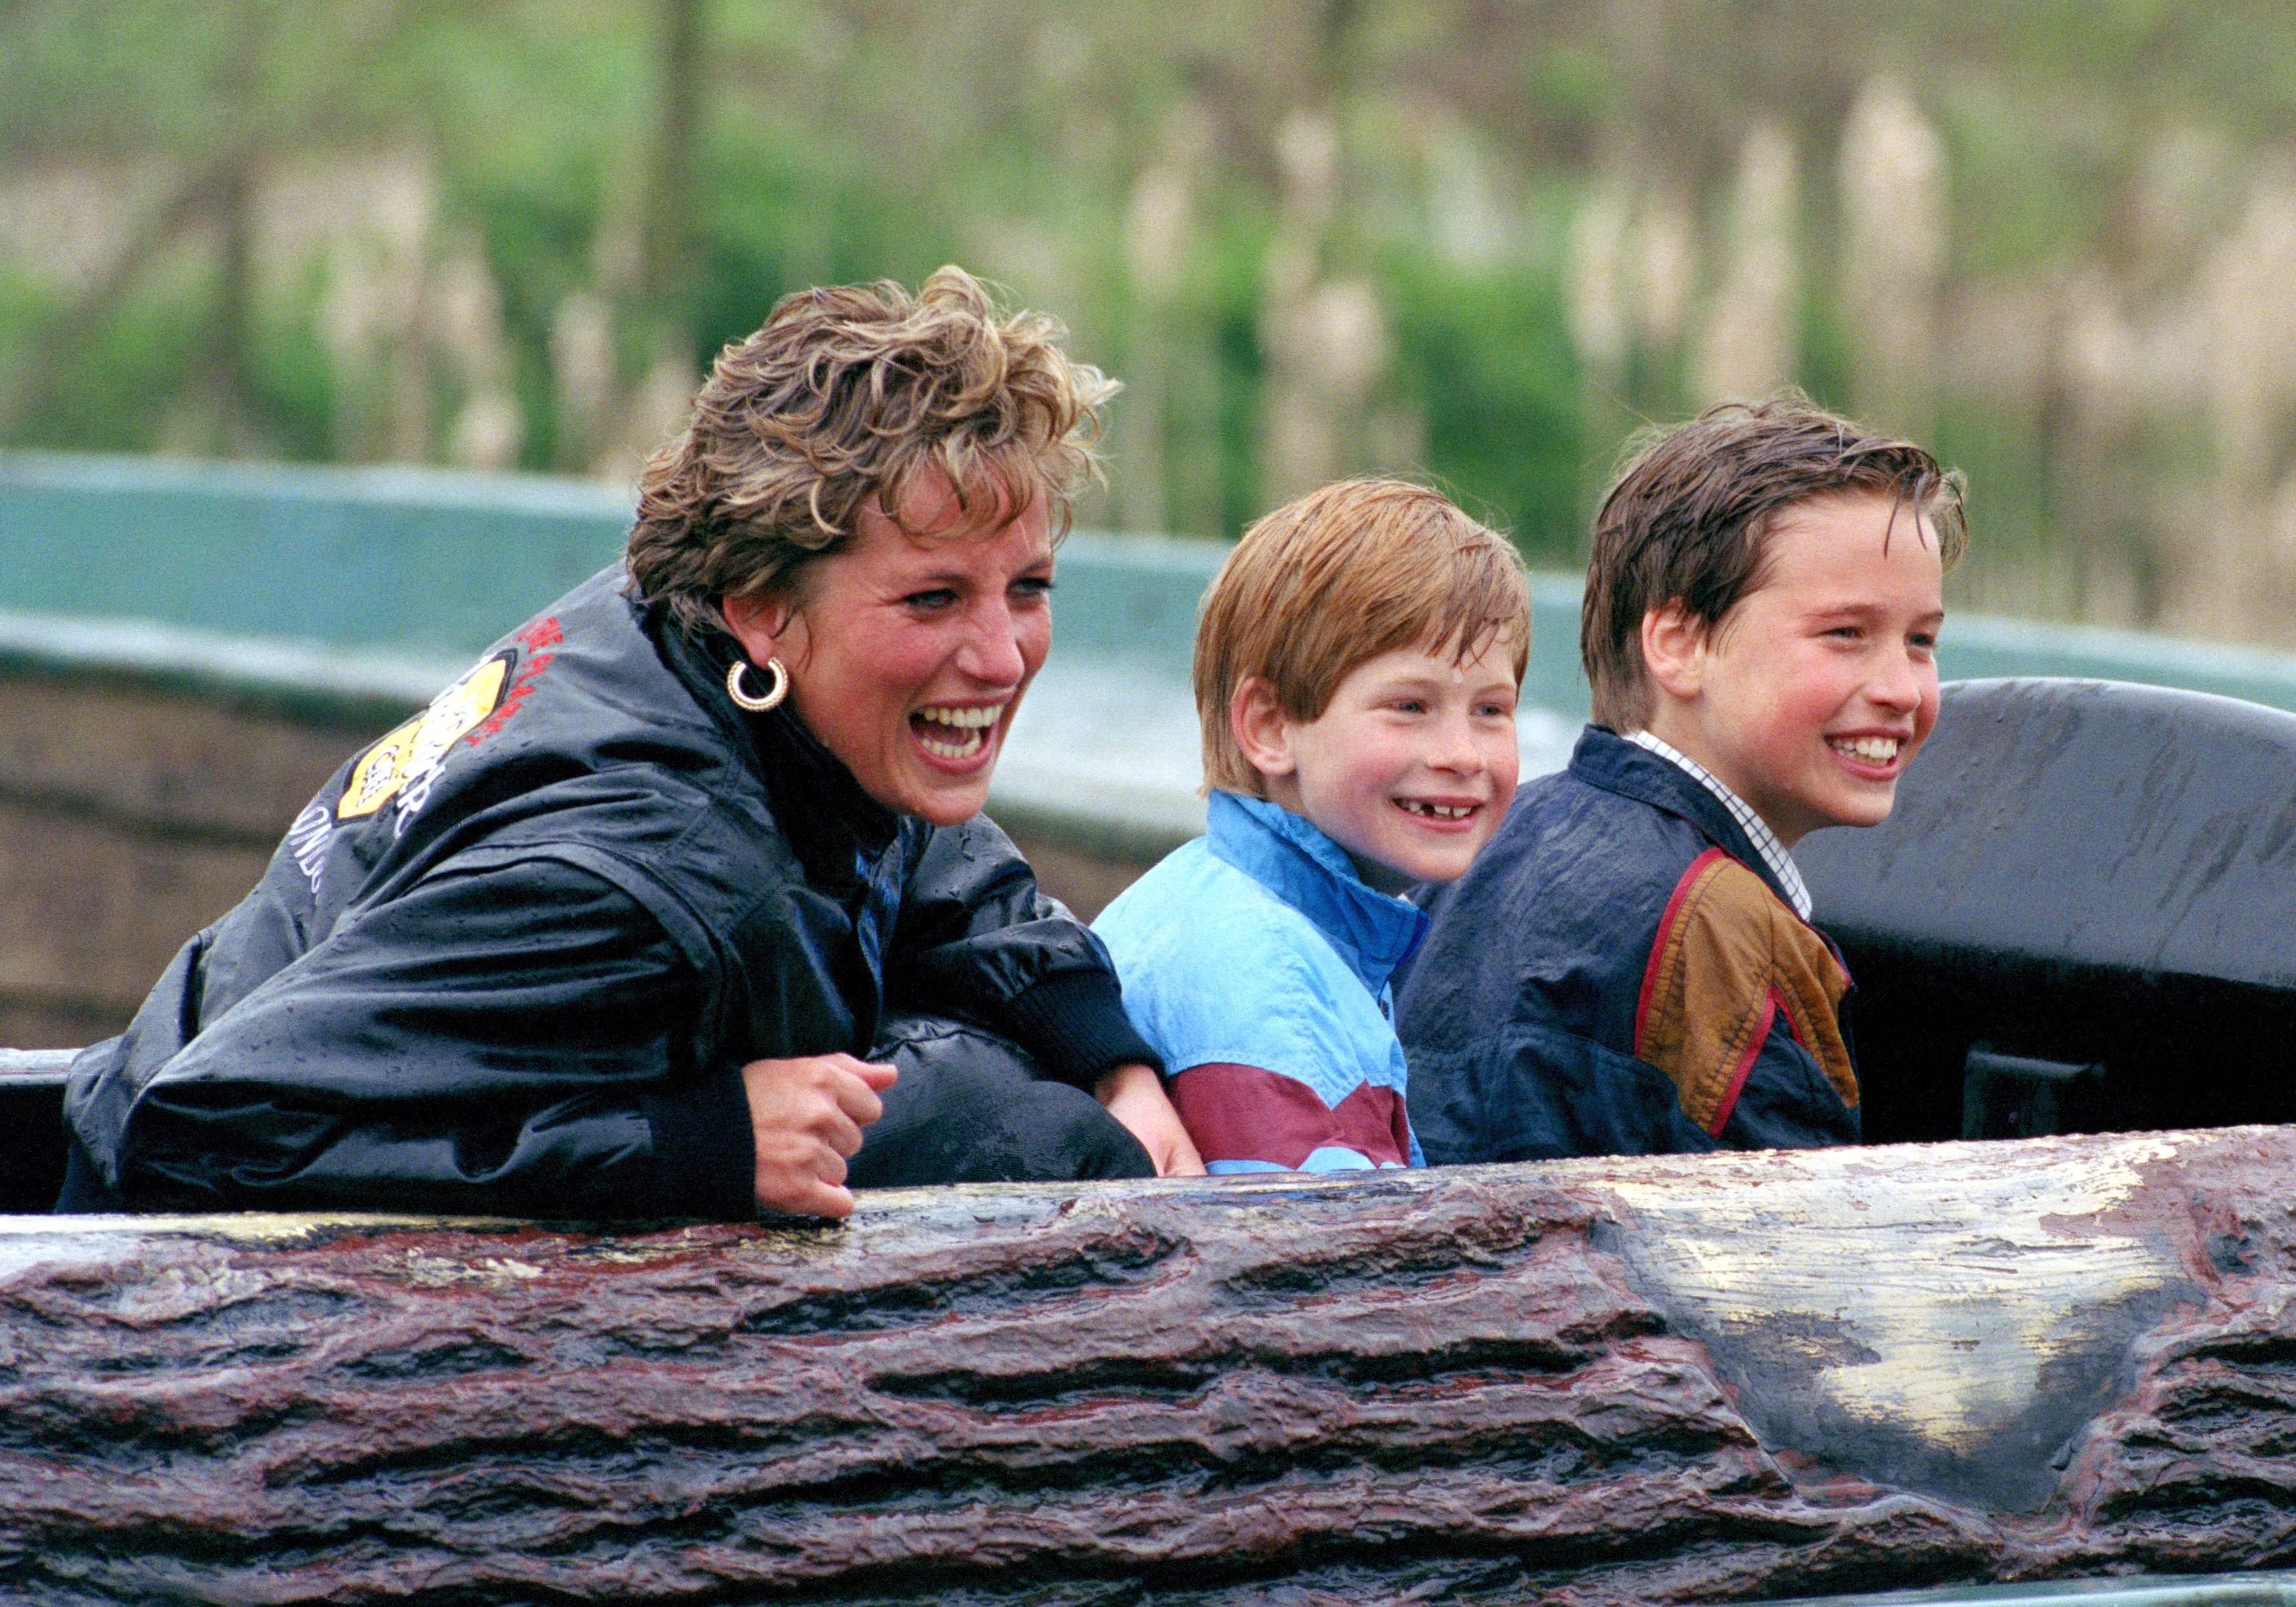 Princess Diana and her sons Prince William and Prince Harry having fun at Thorpe Amusement Park, April, 1993. | Photo: Getty Images.